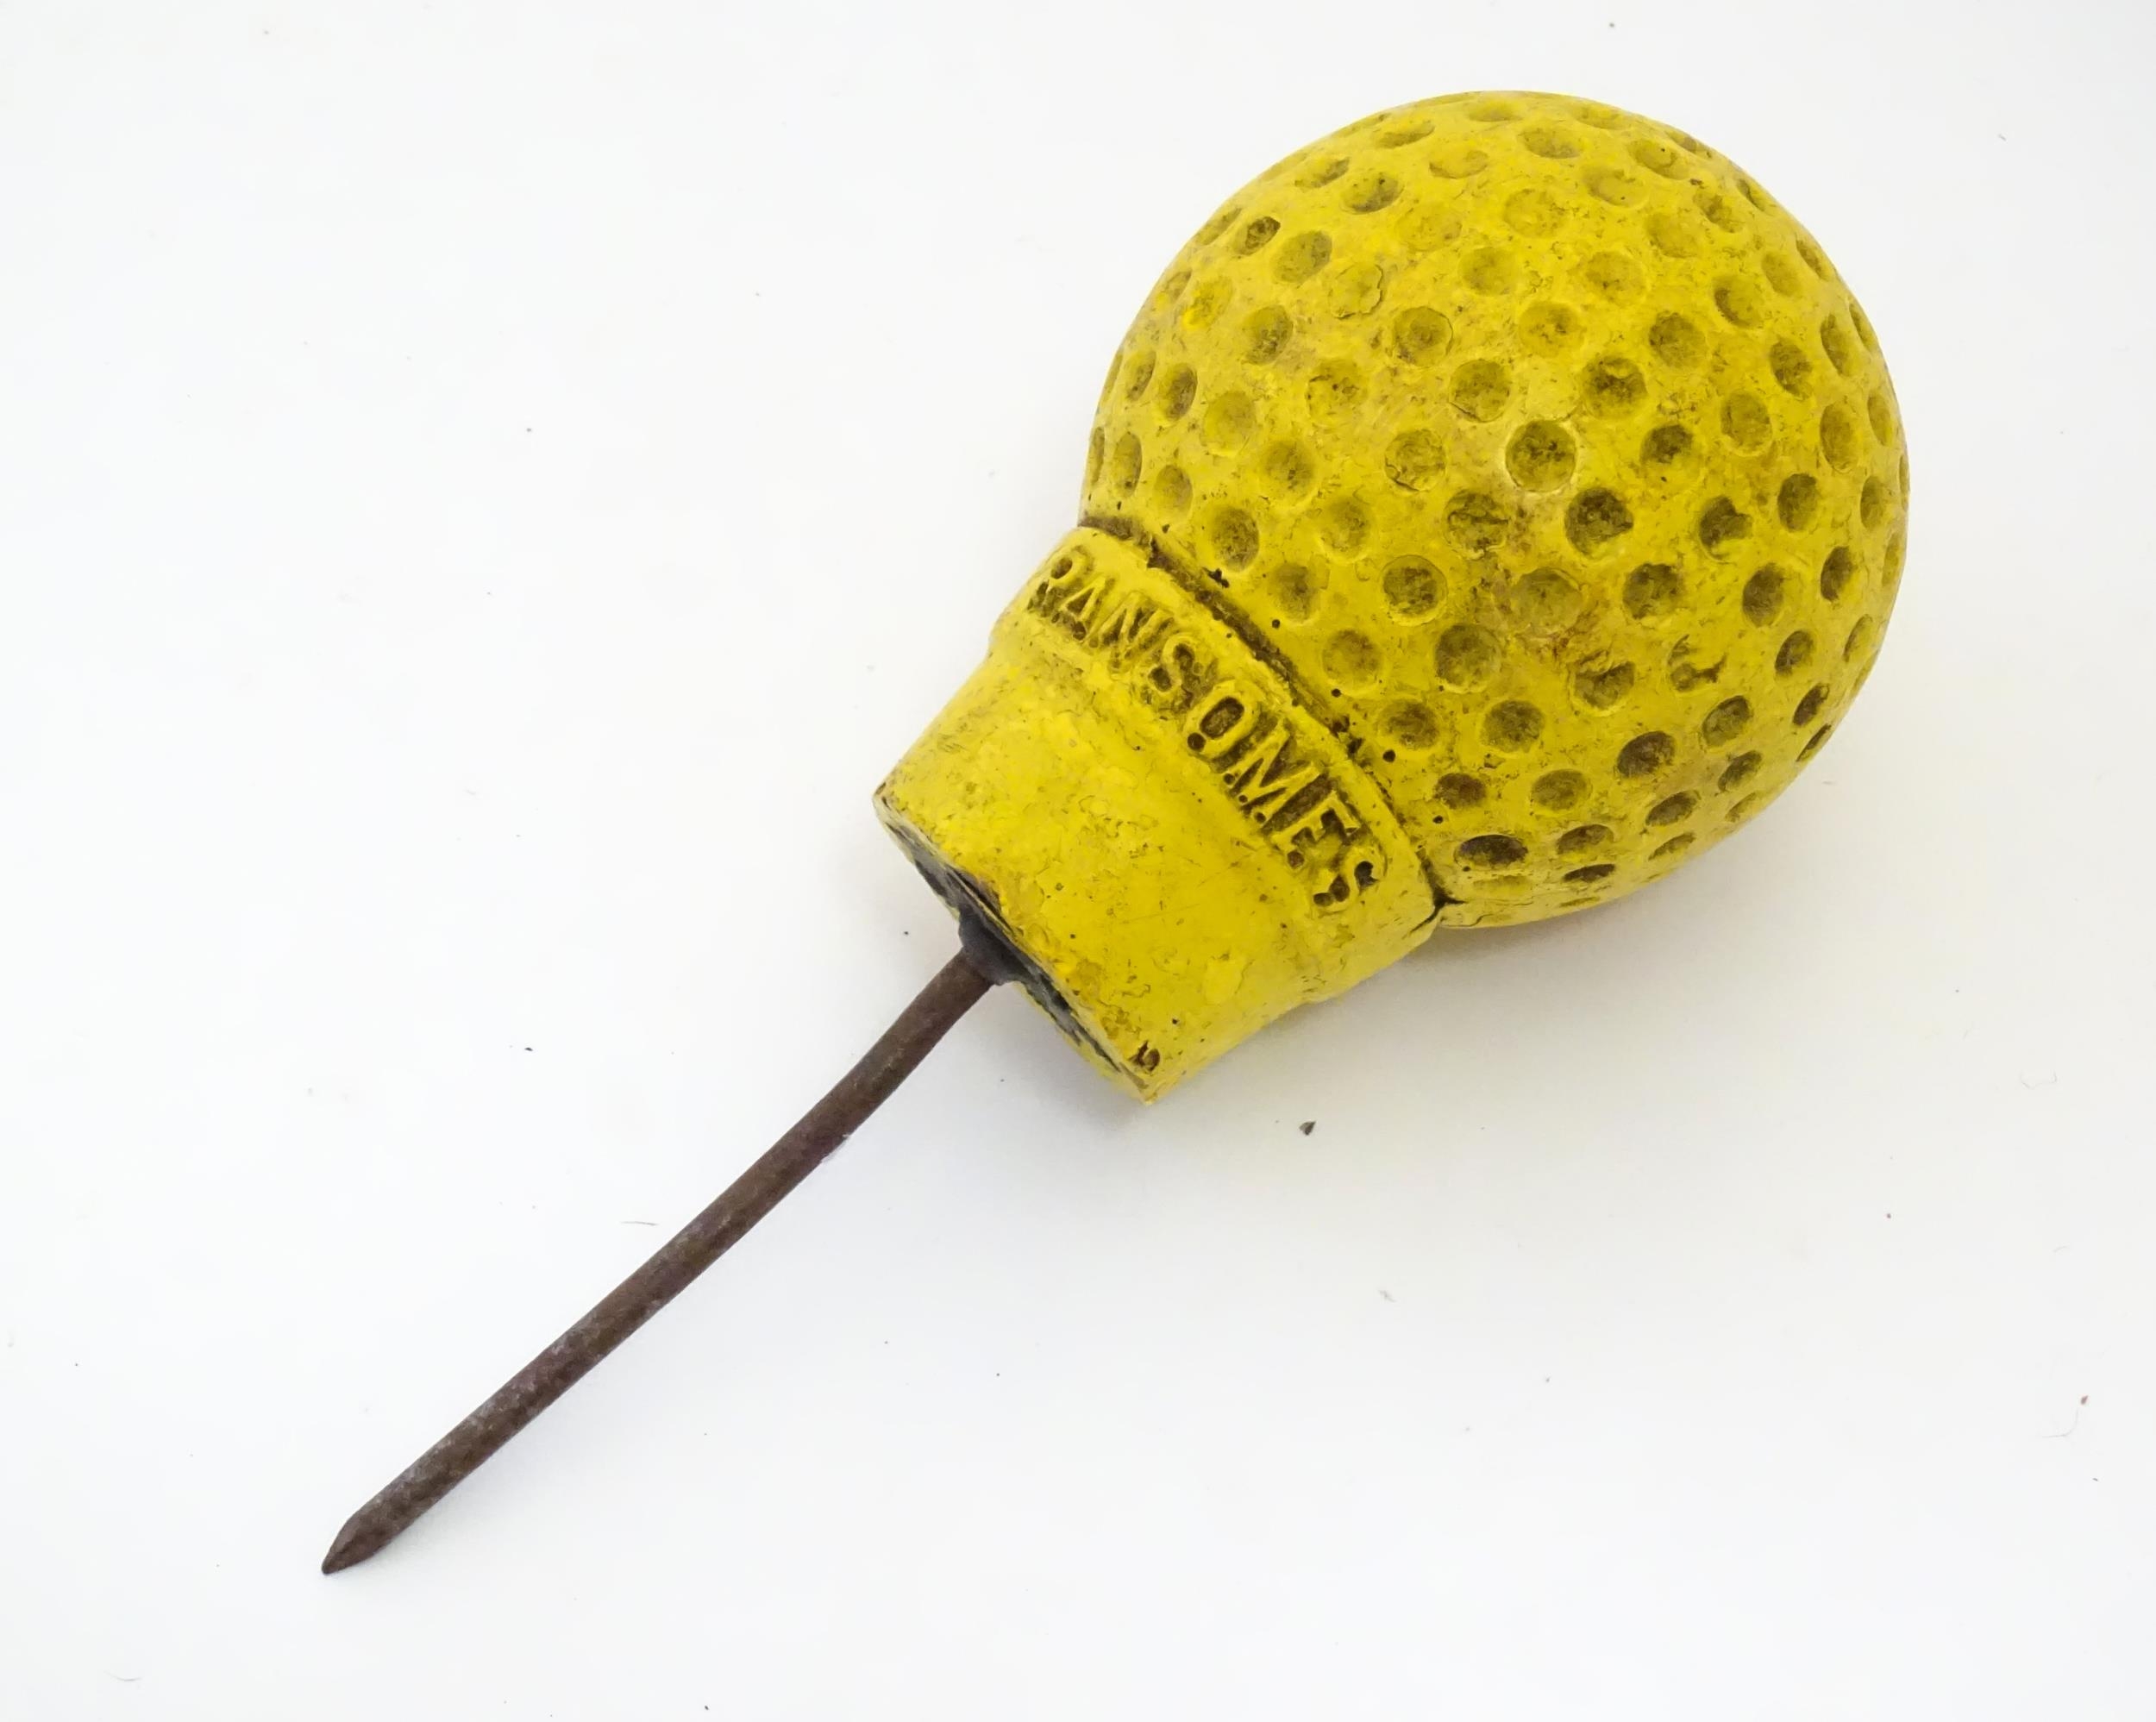 A 20thC novelty golf ball and tee advertising Ransomes - agricultural machinery makers. Approx.